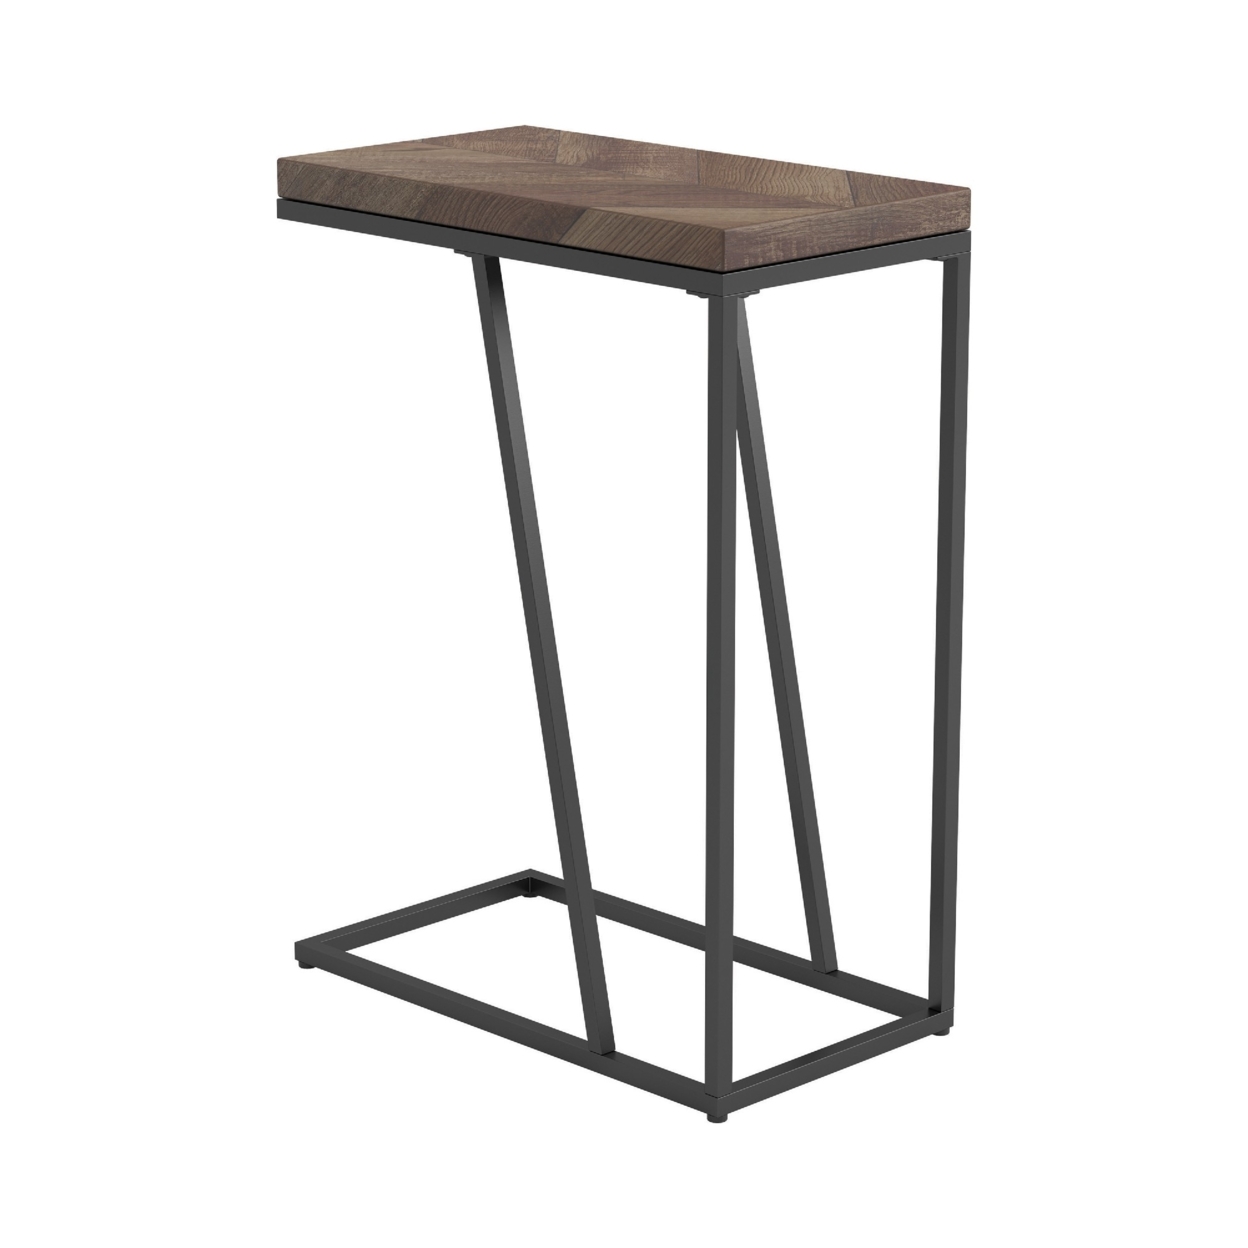 Accent Table With Chevron Pattern Top, Brown- Saltoro Sherpi